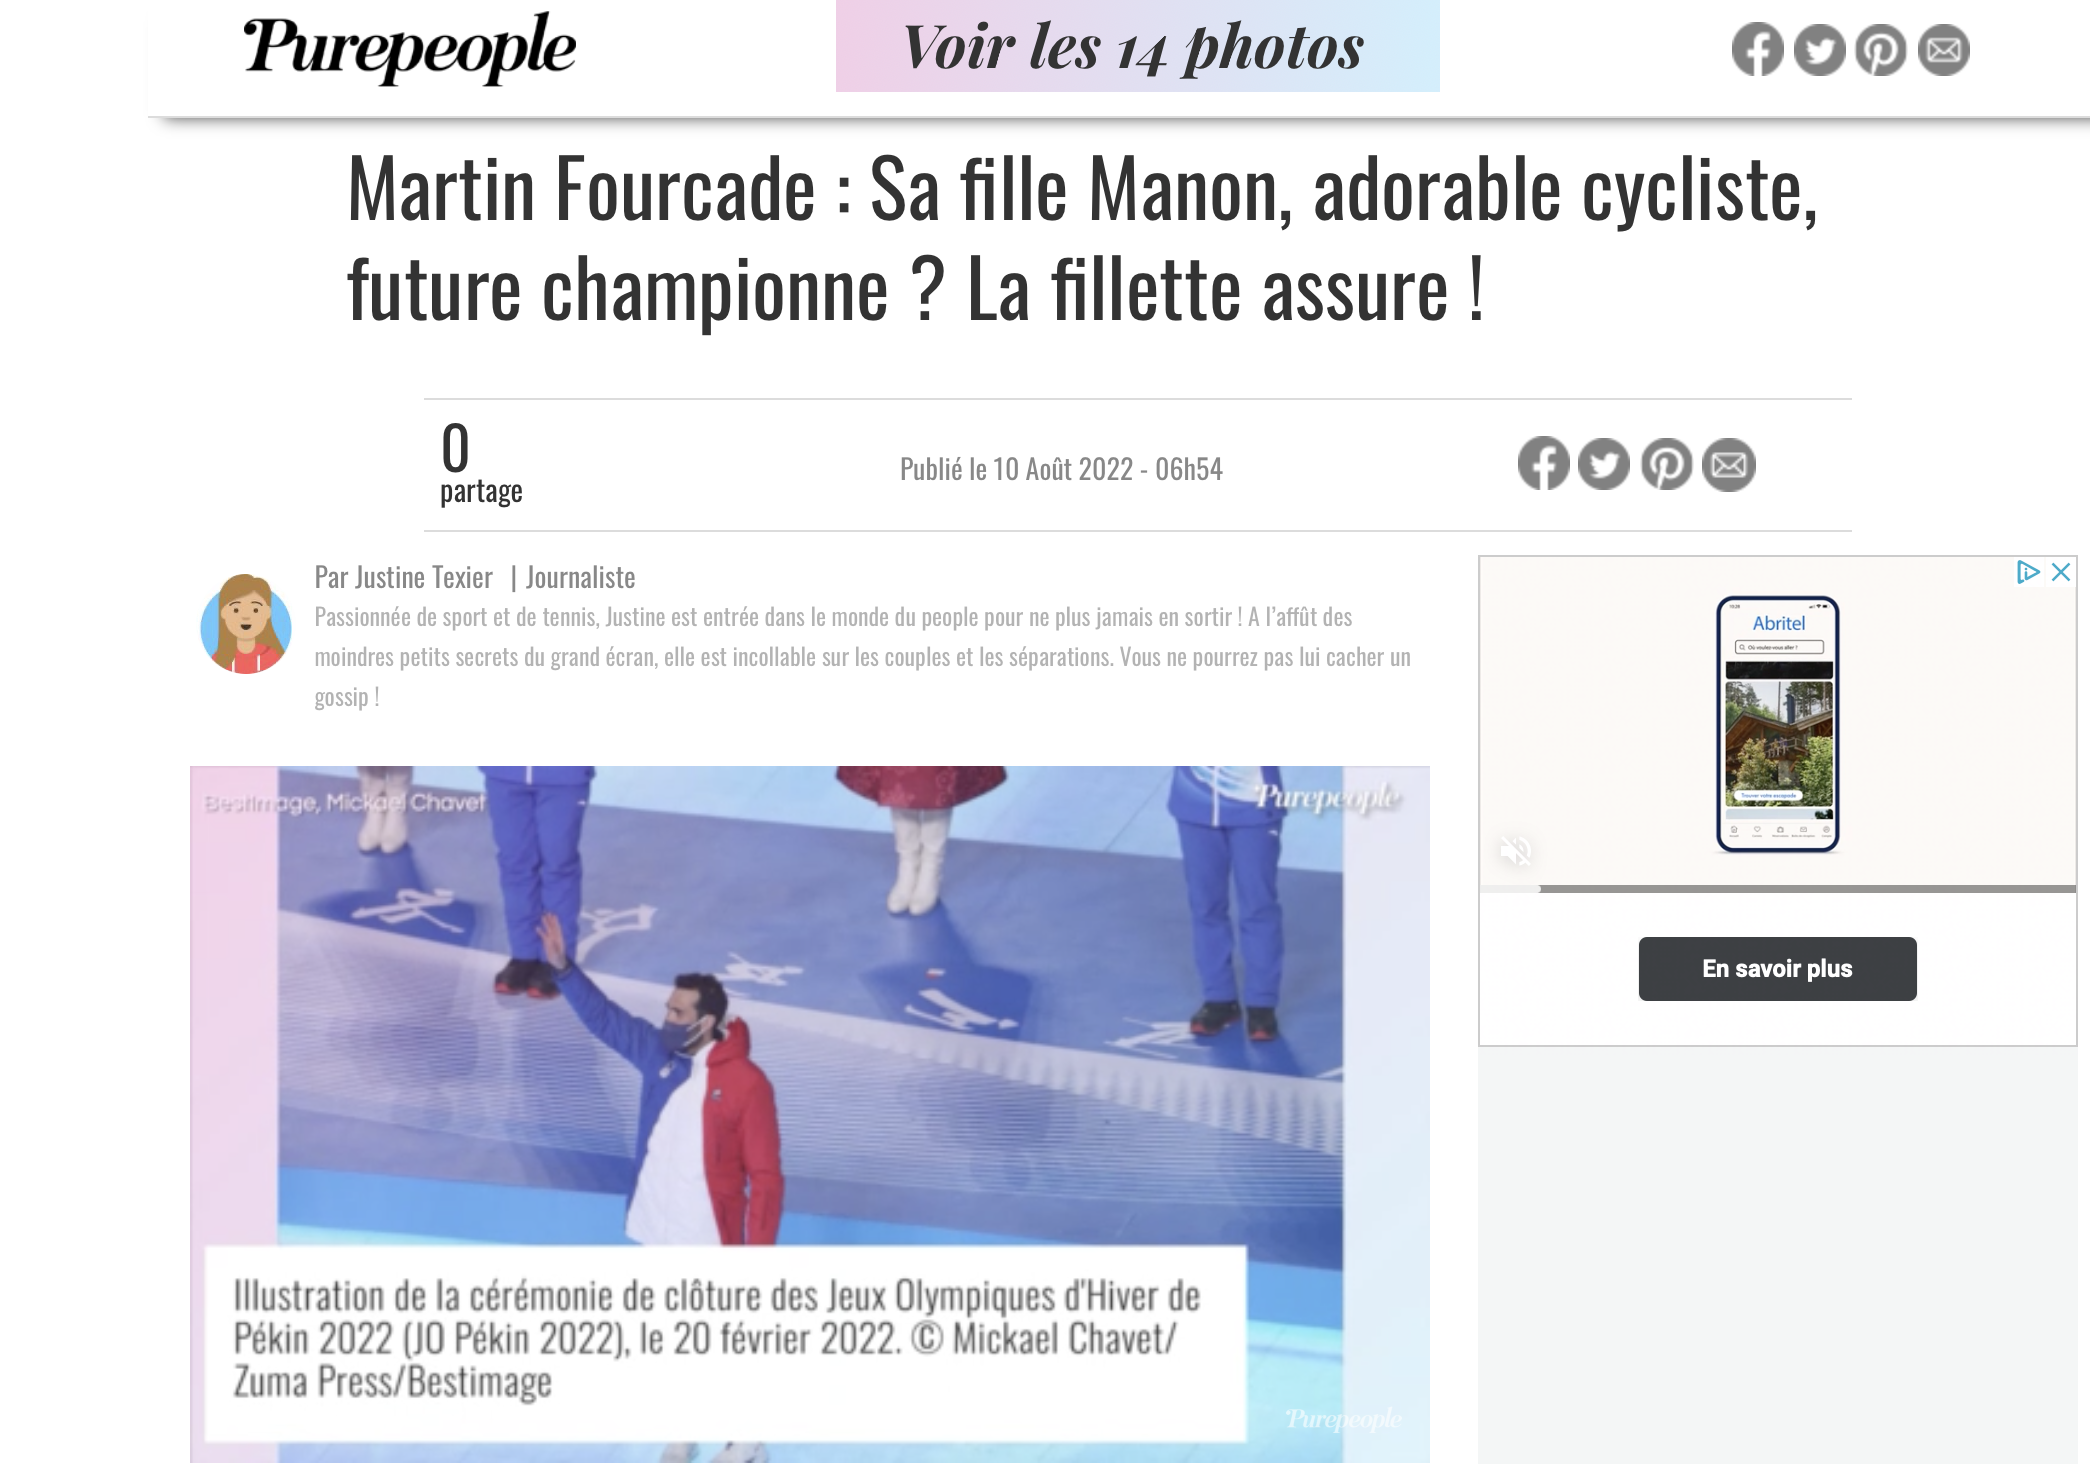 OLYMPIC PHOTOGRAPHER MICKAEL CHAVET - PRESS CLIPS (2) — Mickael Chavet